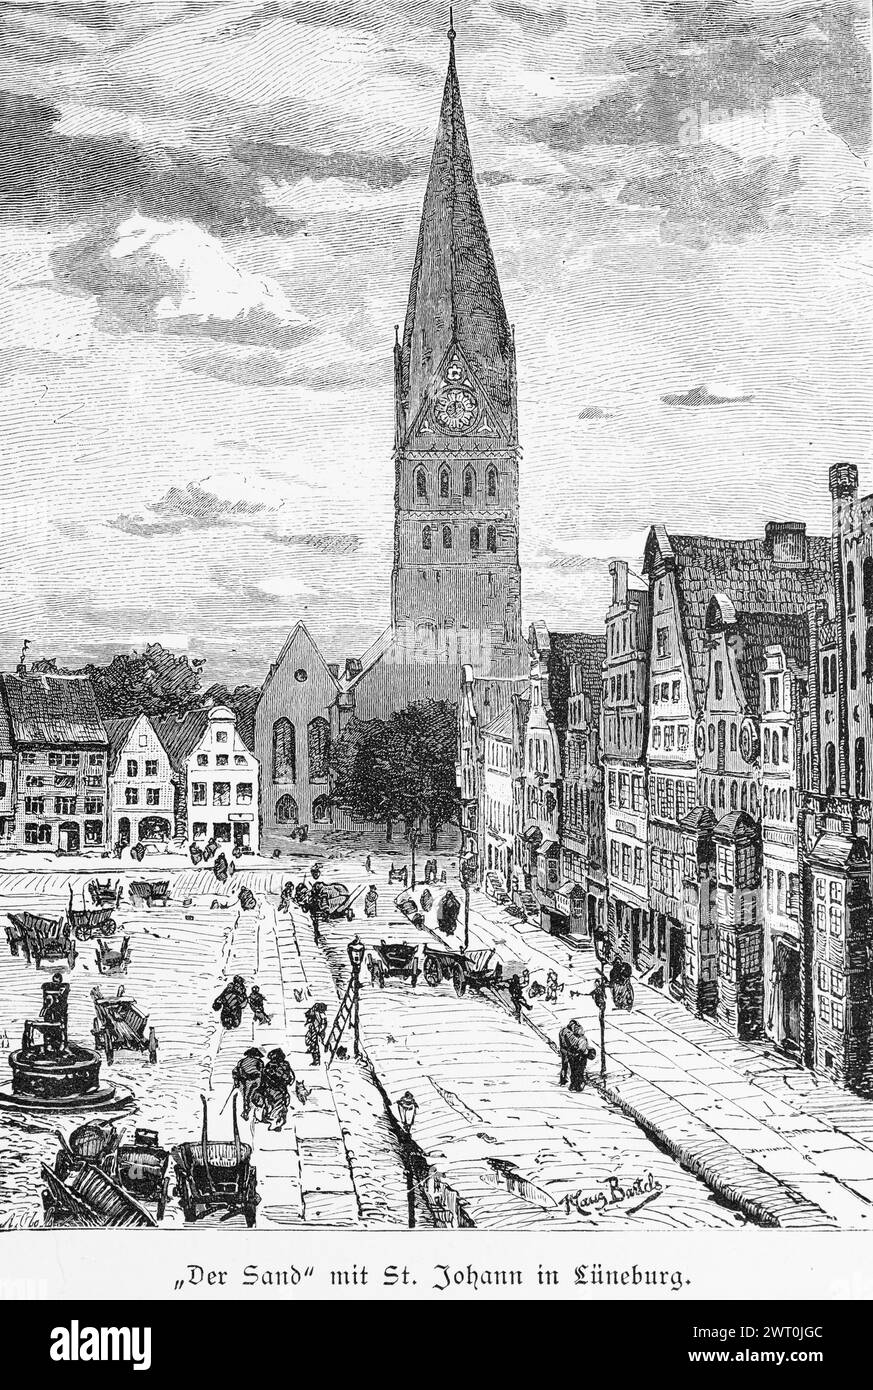 Square The Sand with St. John's Church, Lueneburg, Lower Saxony, Germany, church tower, clock tower, gabled houses, old town, market, cart, people Stock Photo